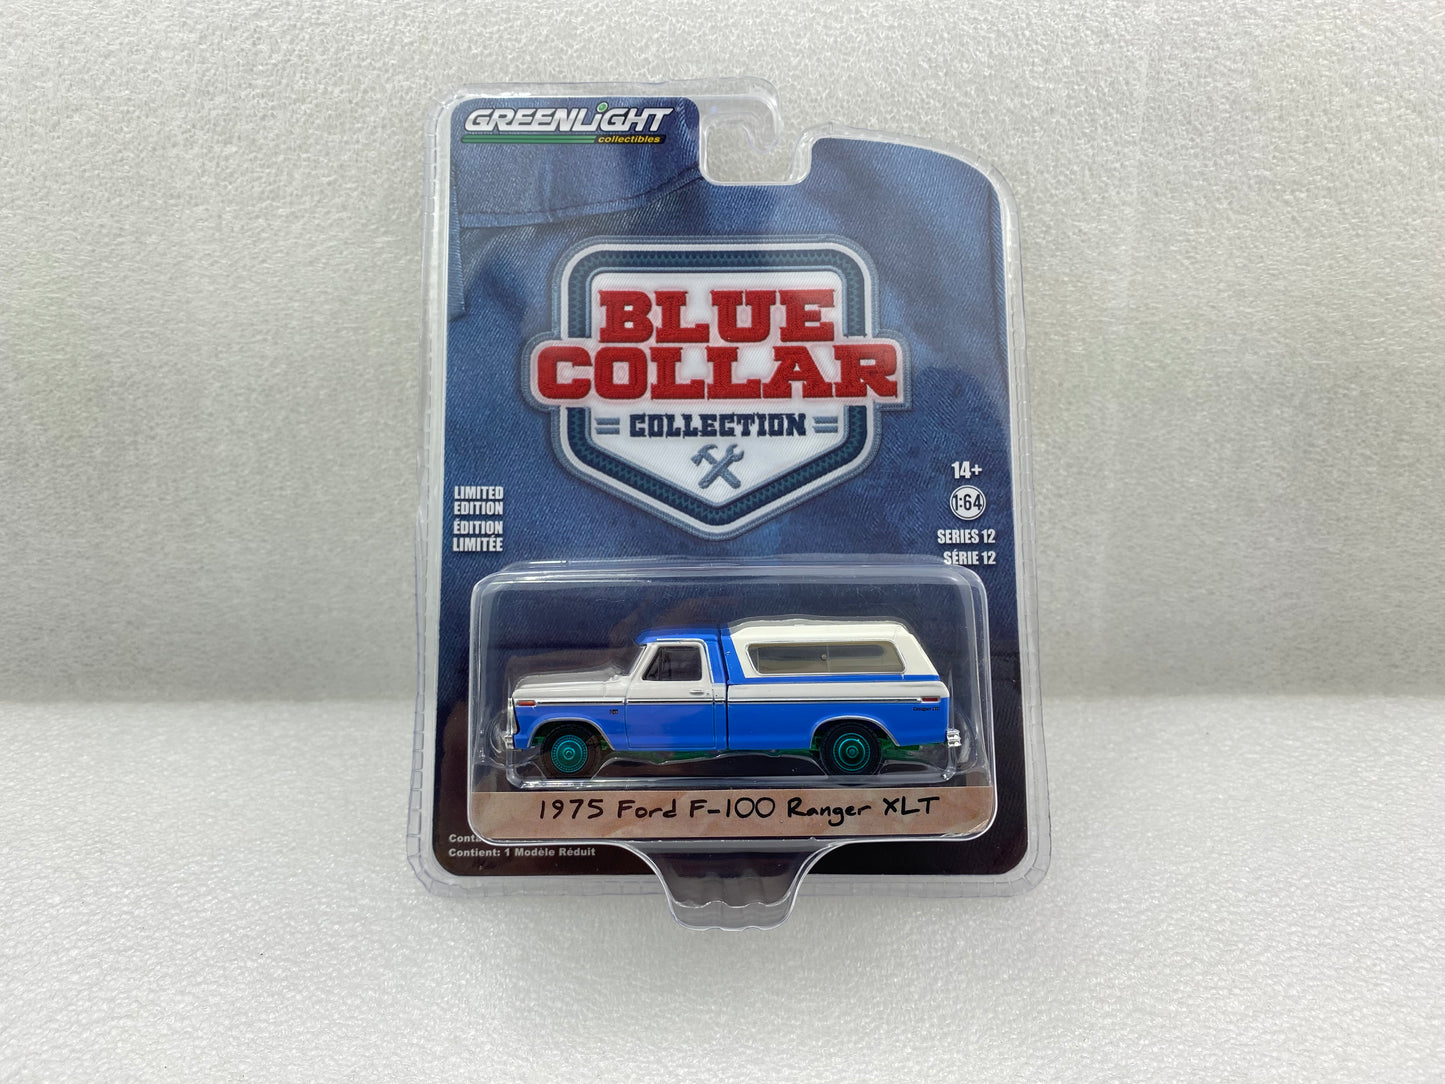 GreenLight Green Machine 1:64 Blue Collar Collection Series 12 - 1975 Ford F-100 Ranger XLT with Camper Shell - Wind Blue and Wimbledon White 35260-B